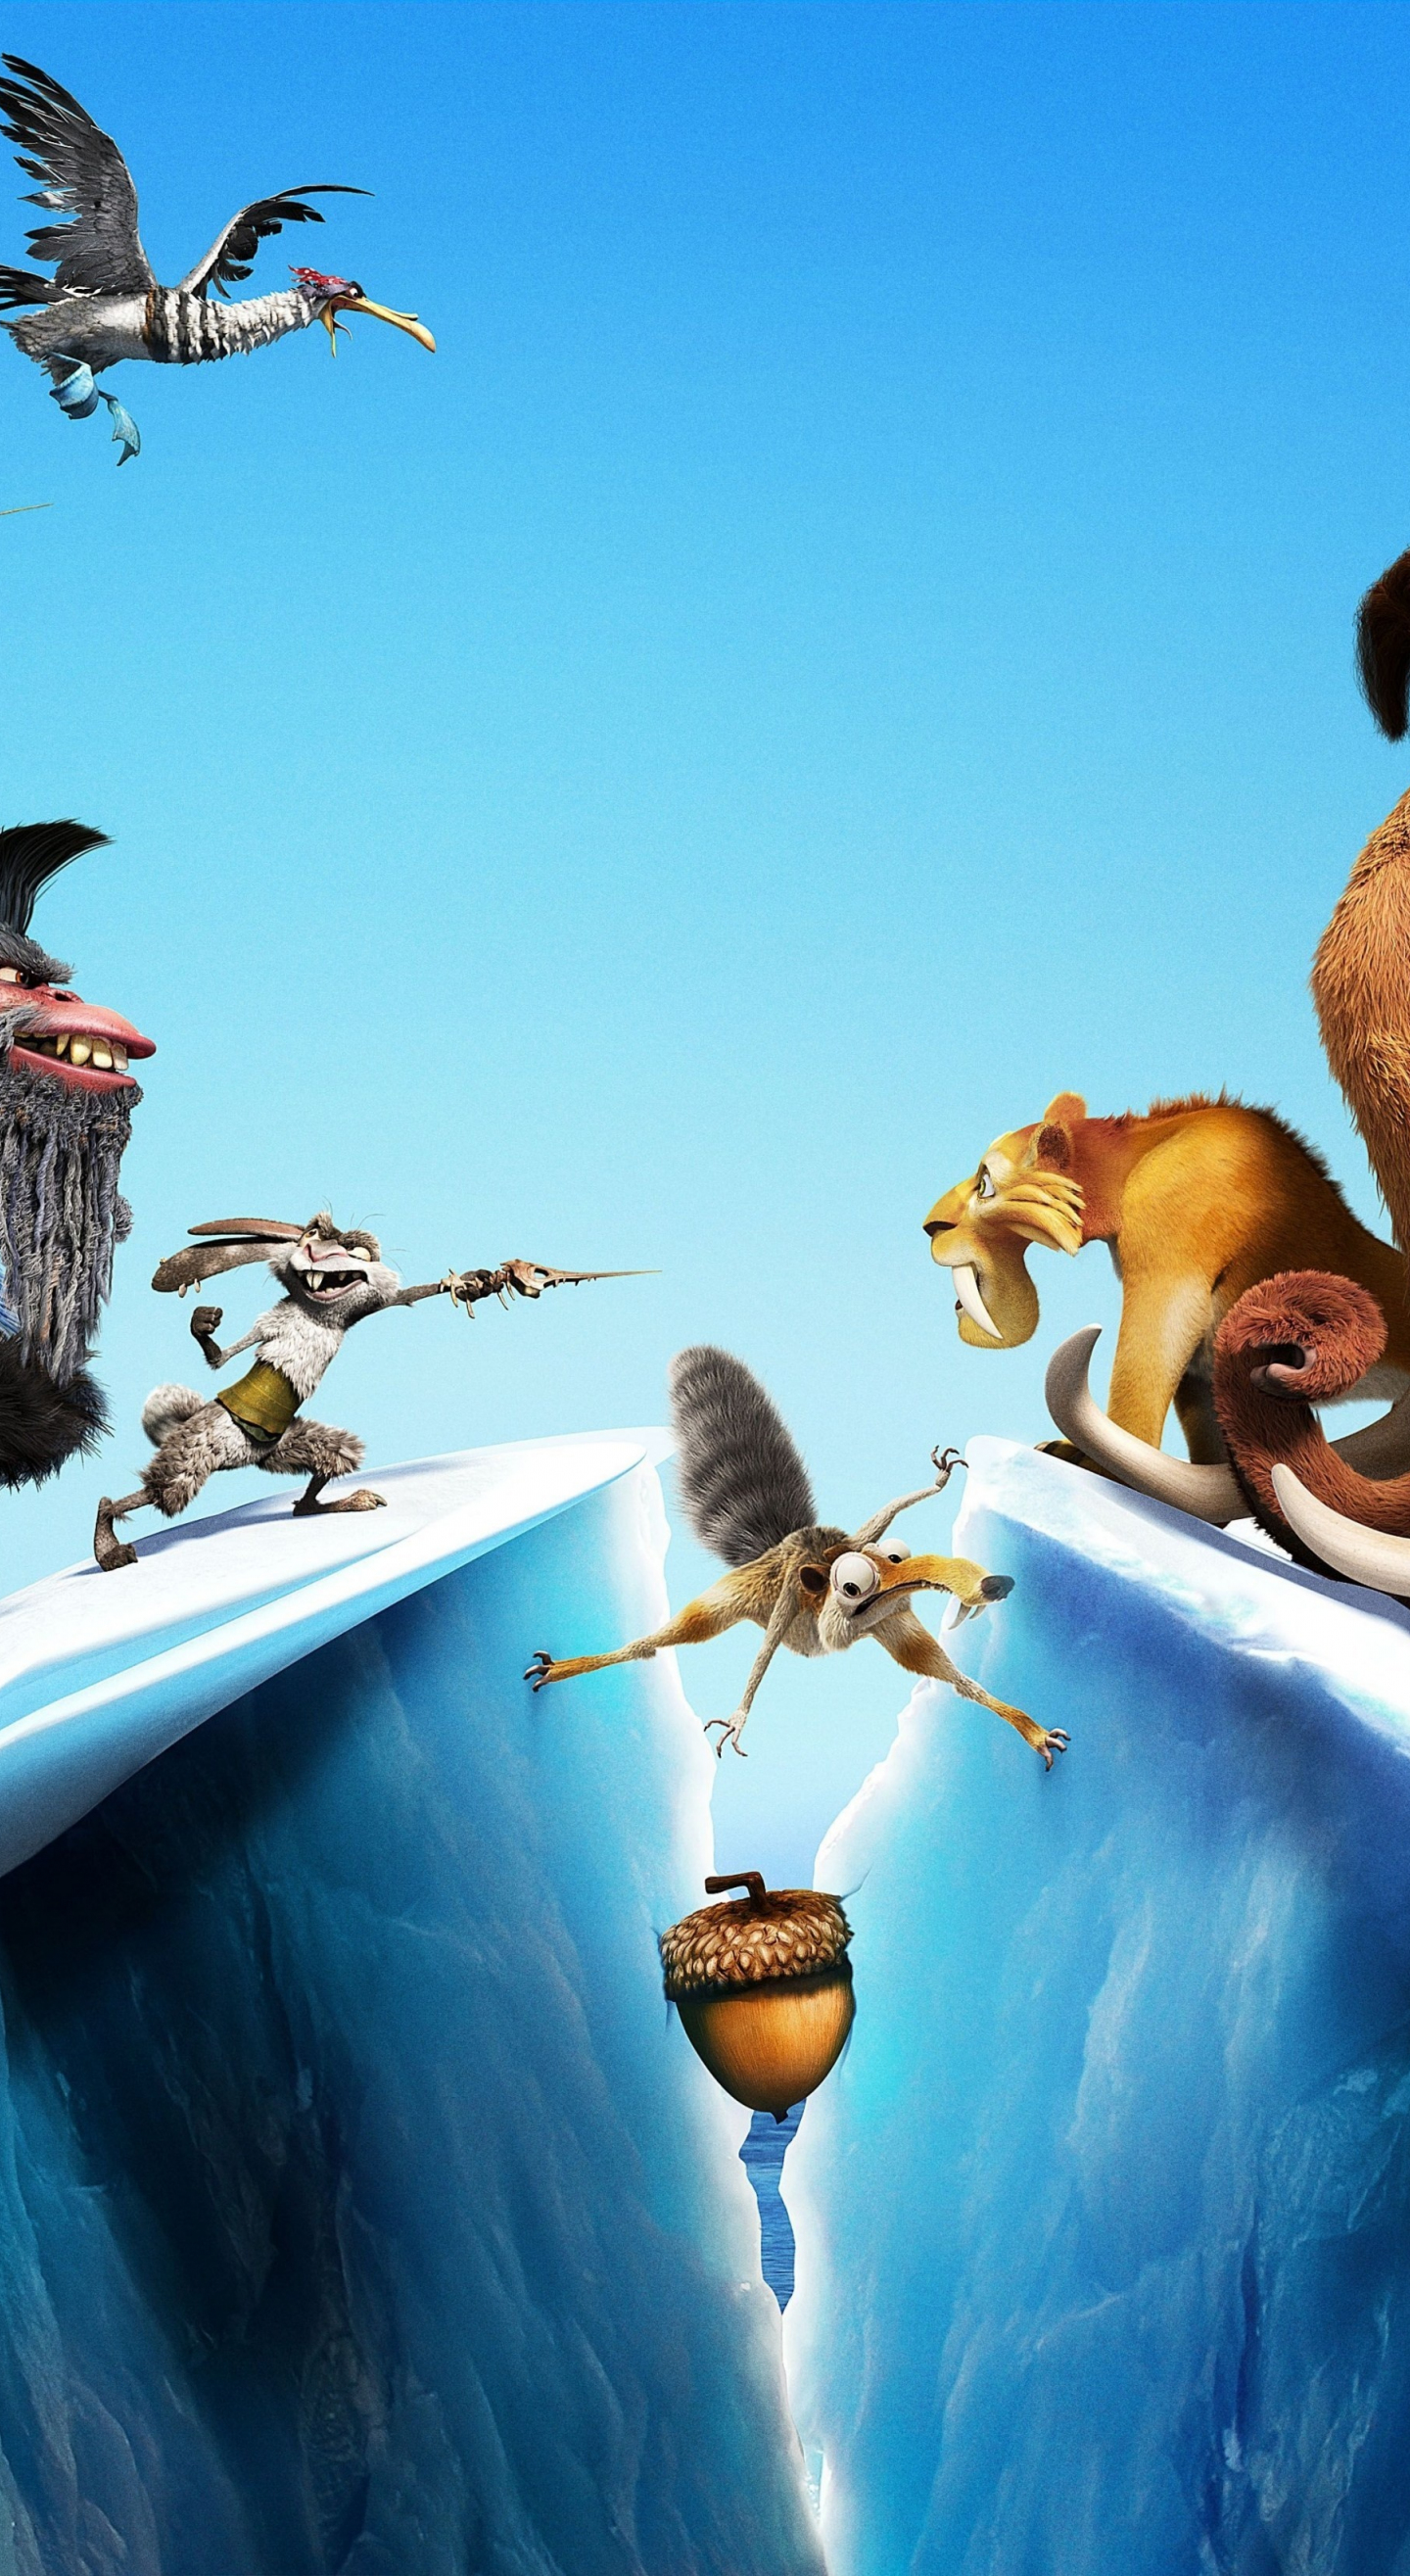 Ice age 5 HD wallpapers free download  Wallpaperbetter